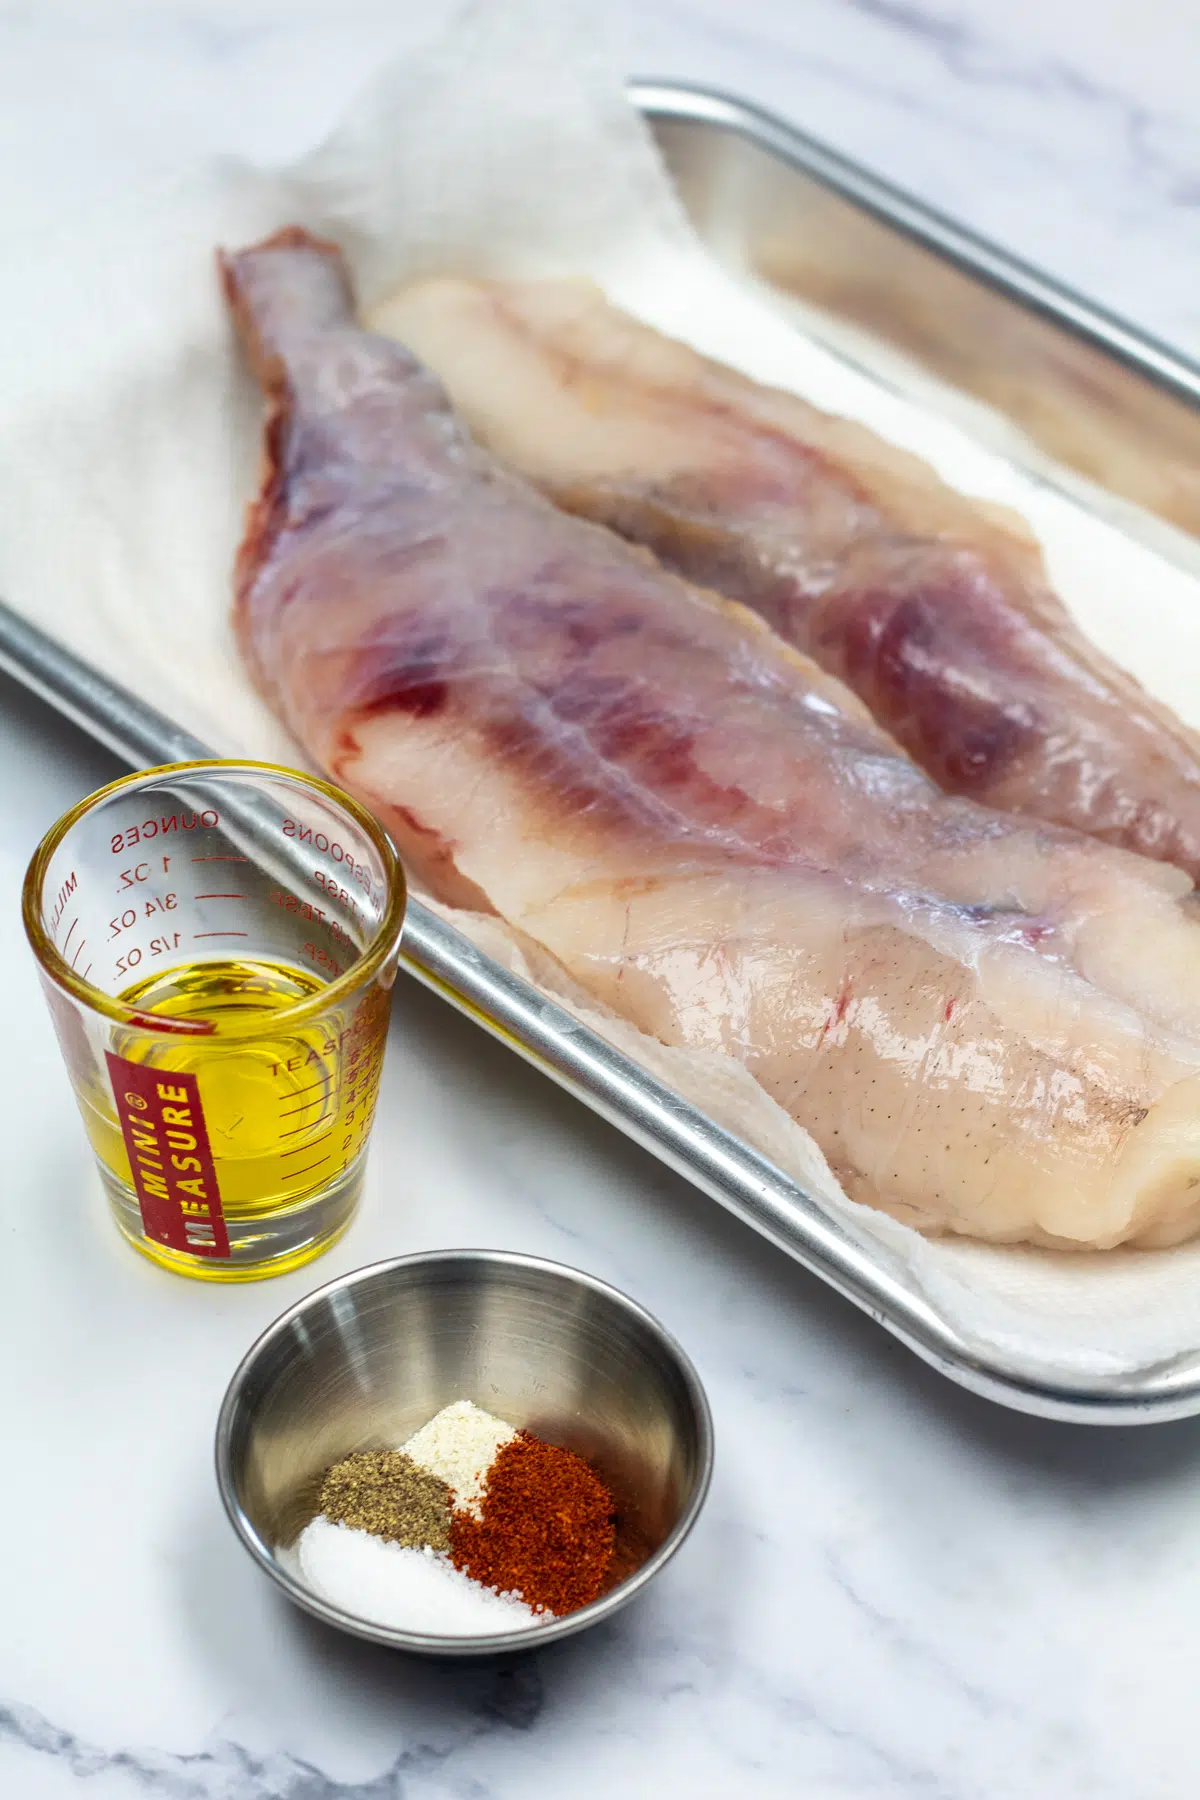 Tall photo showing ingredients for baked monkfish.